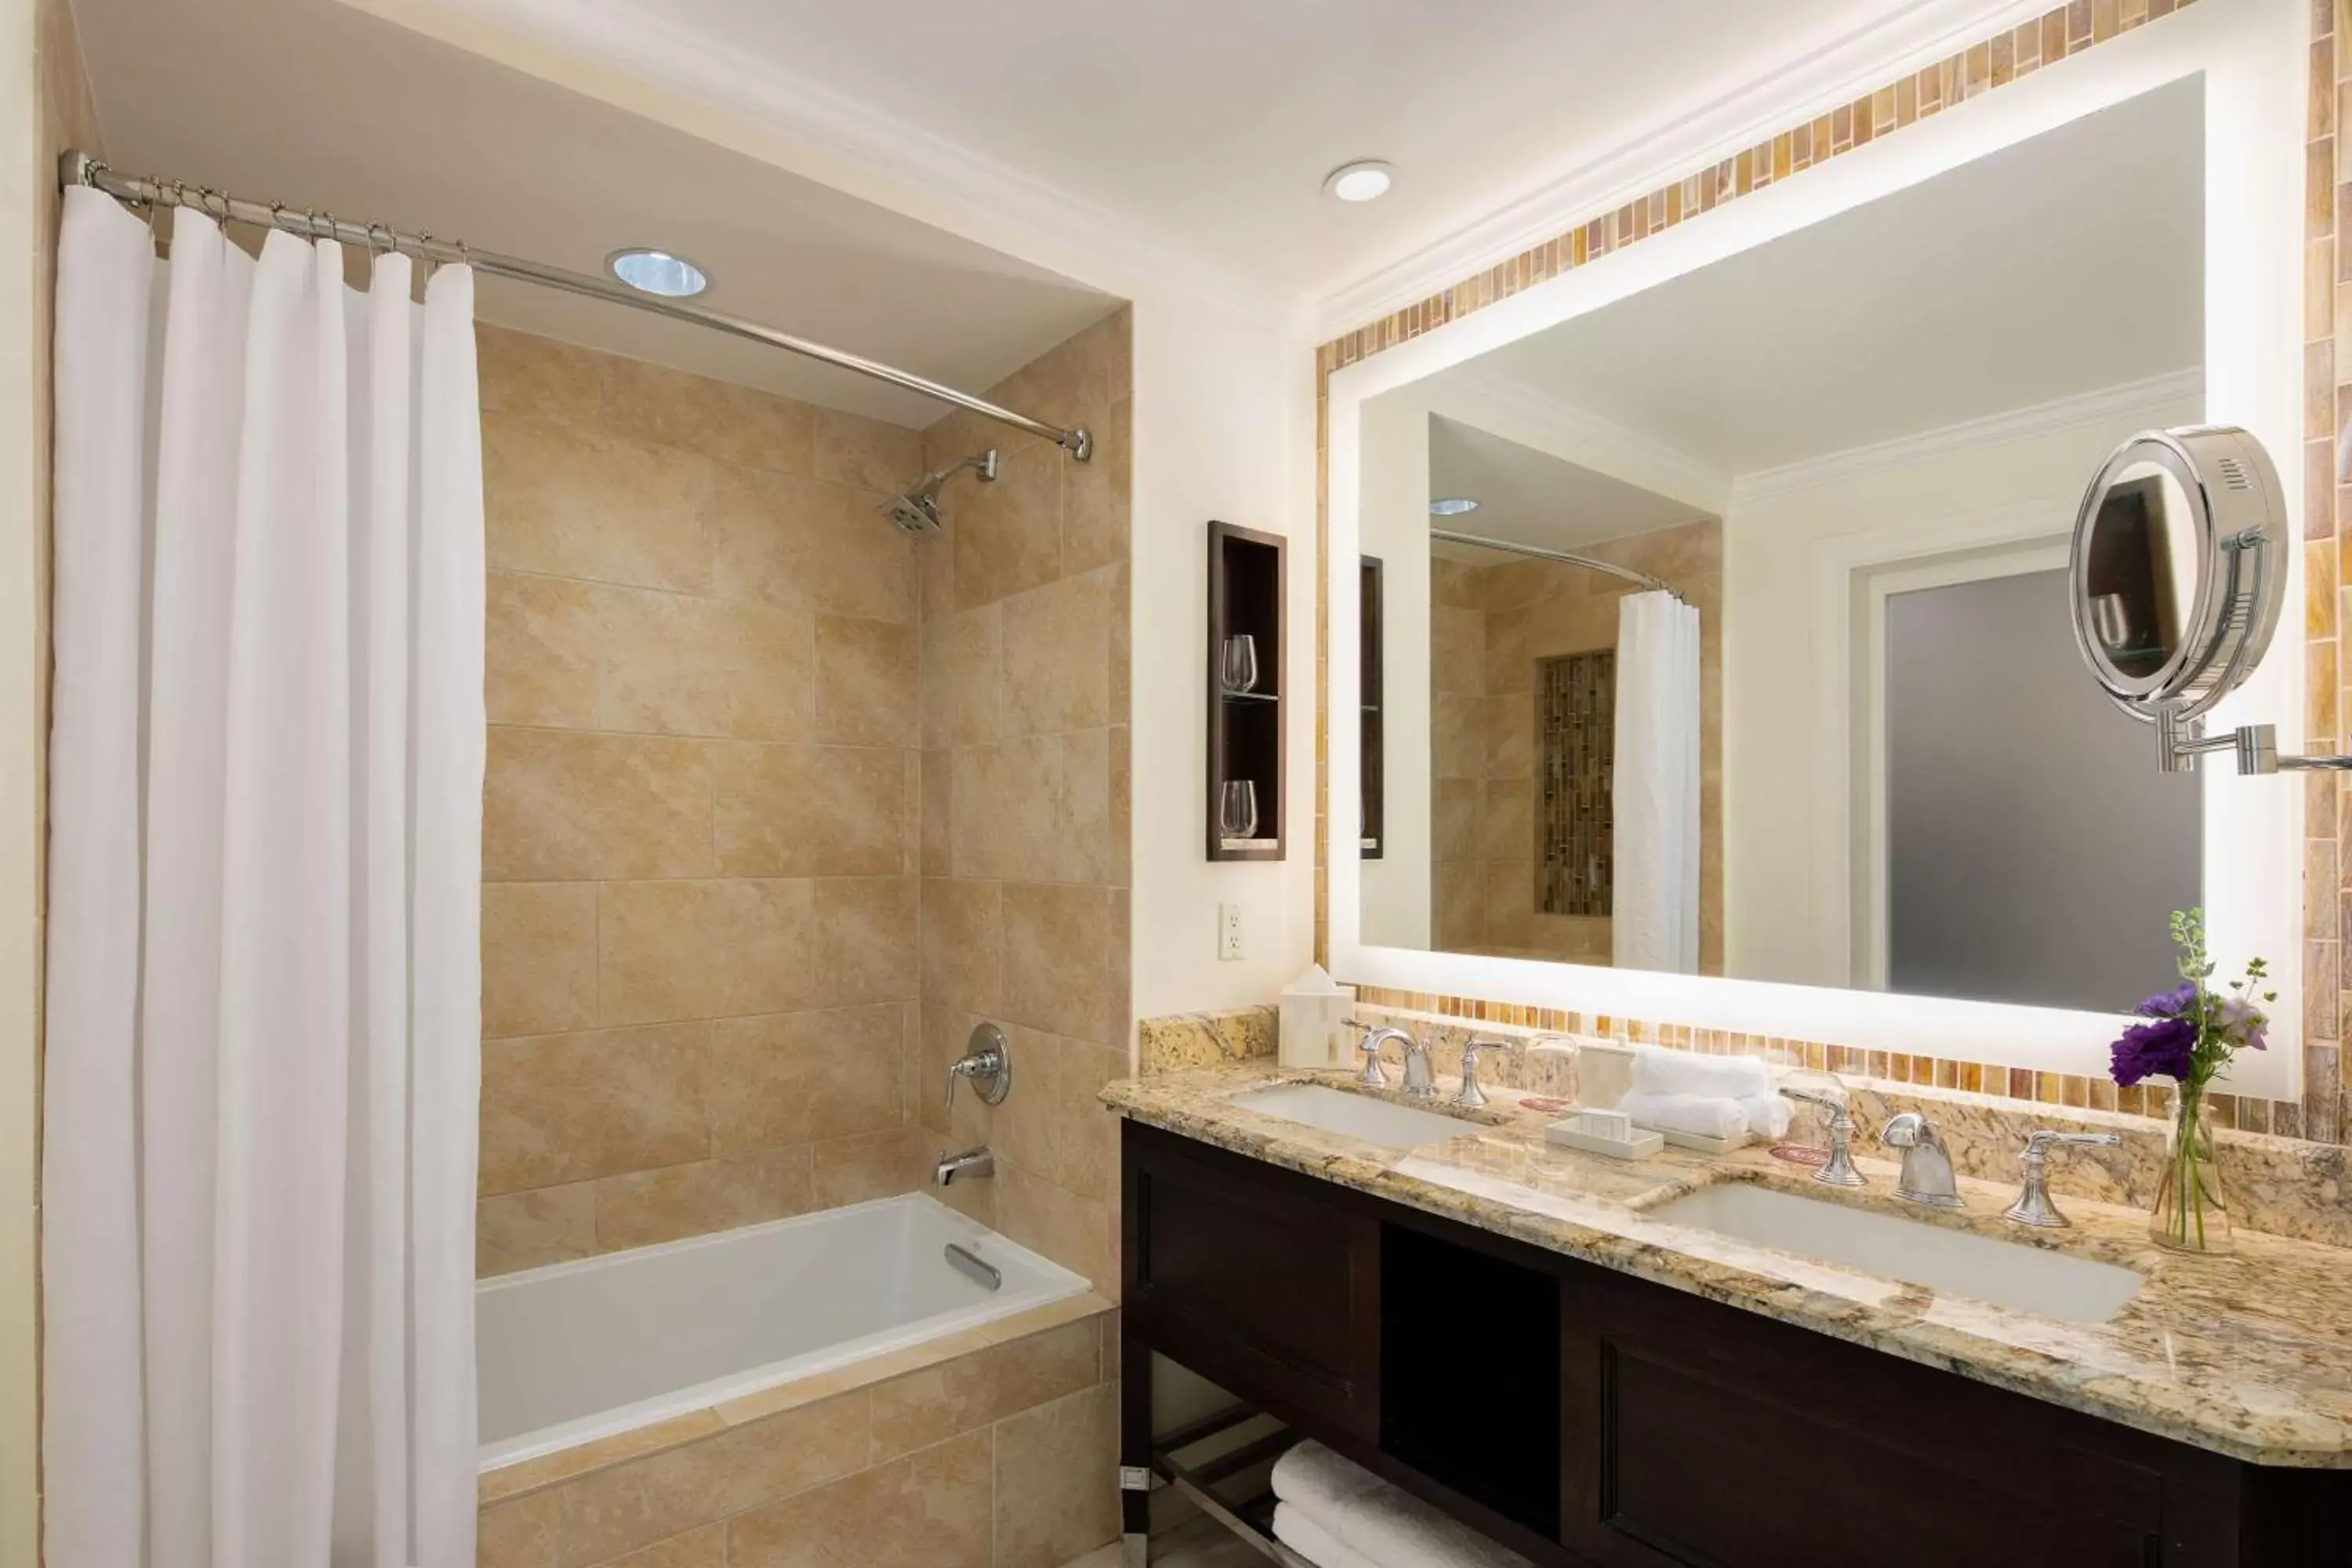 Bathroom in The Meritage Resort and Spa